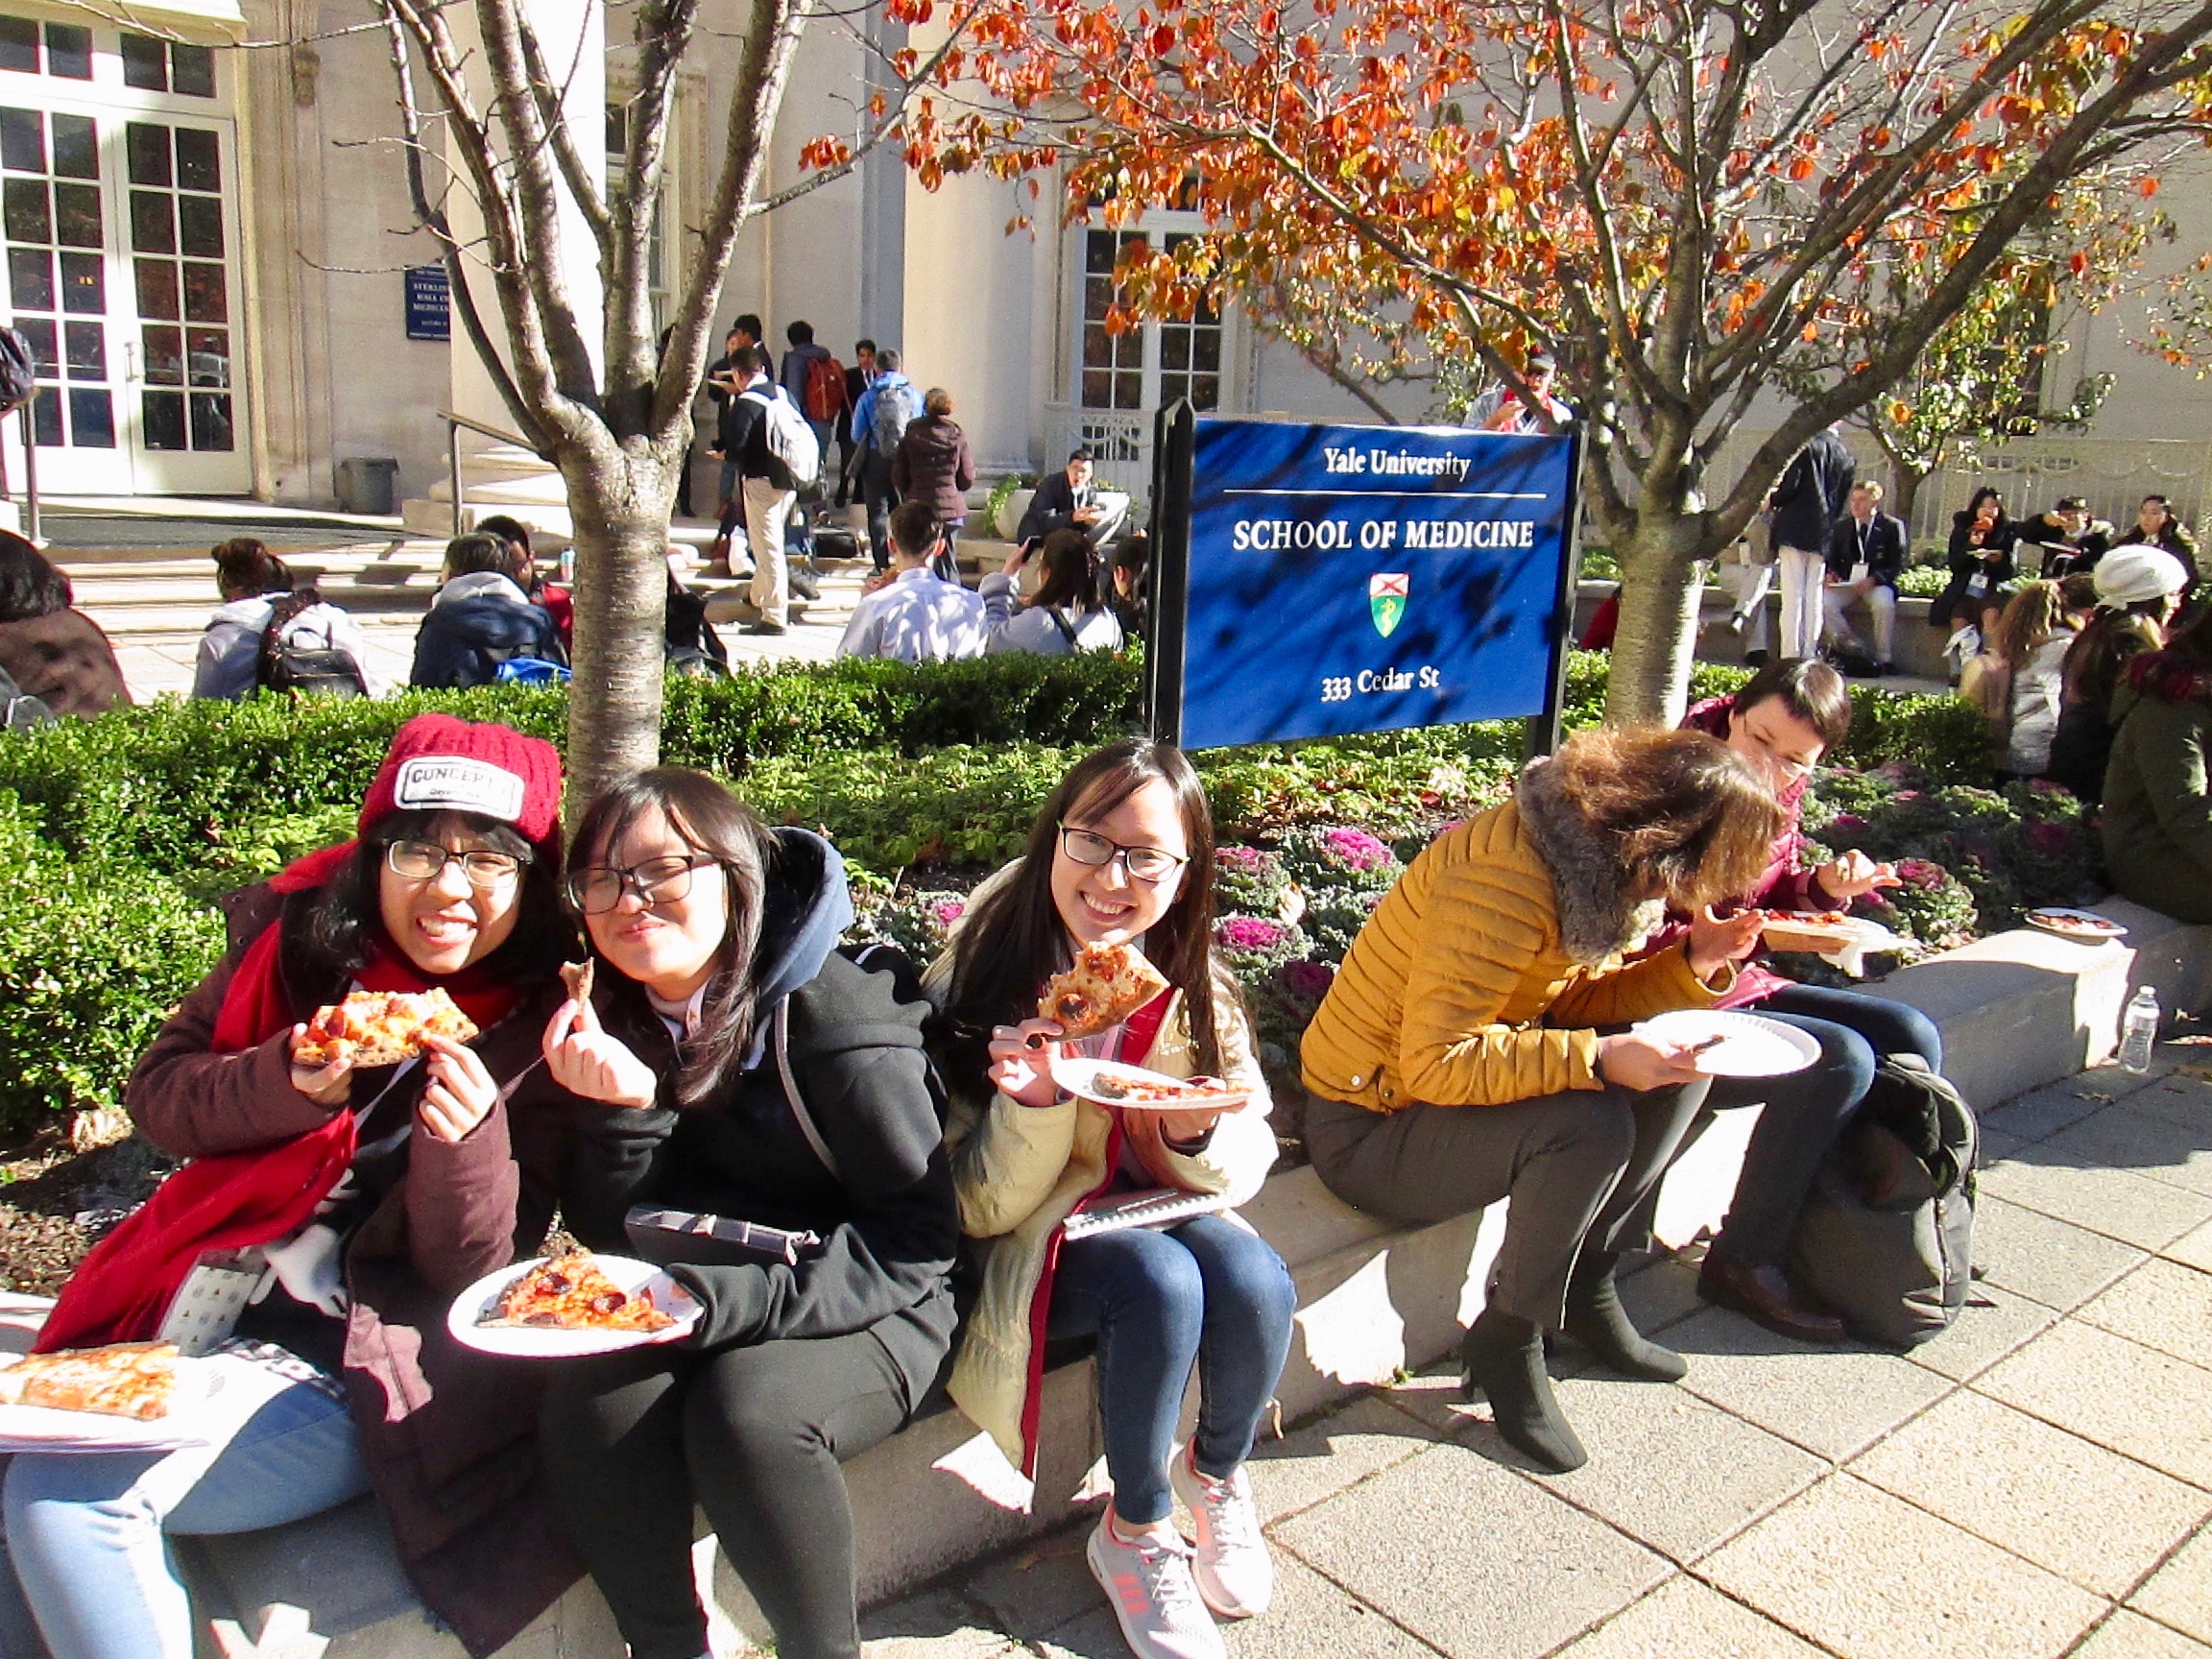 Pizza at Yale.jpg